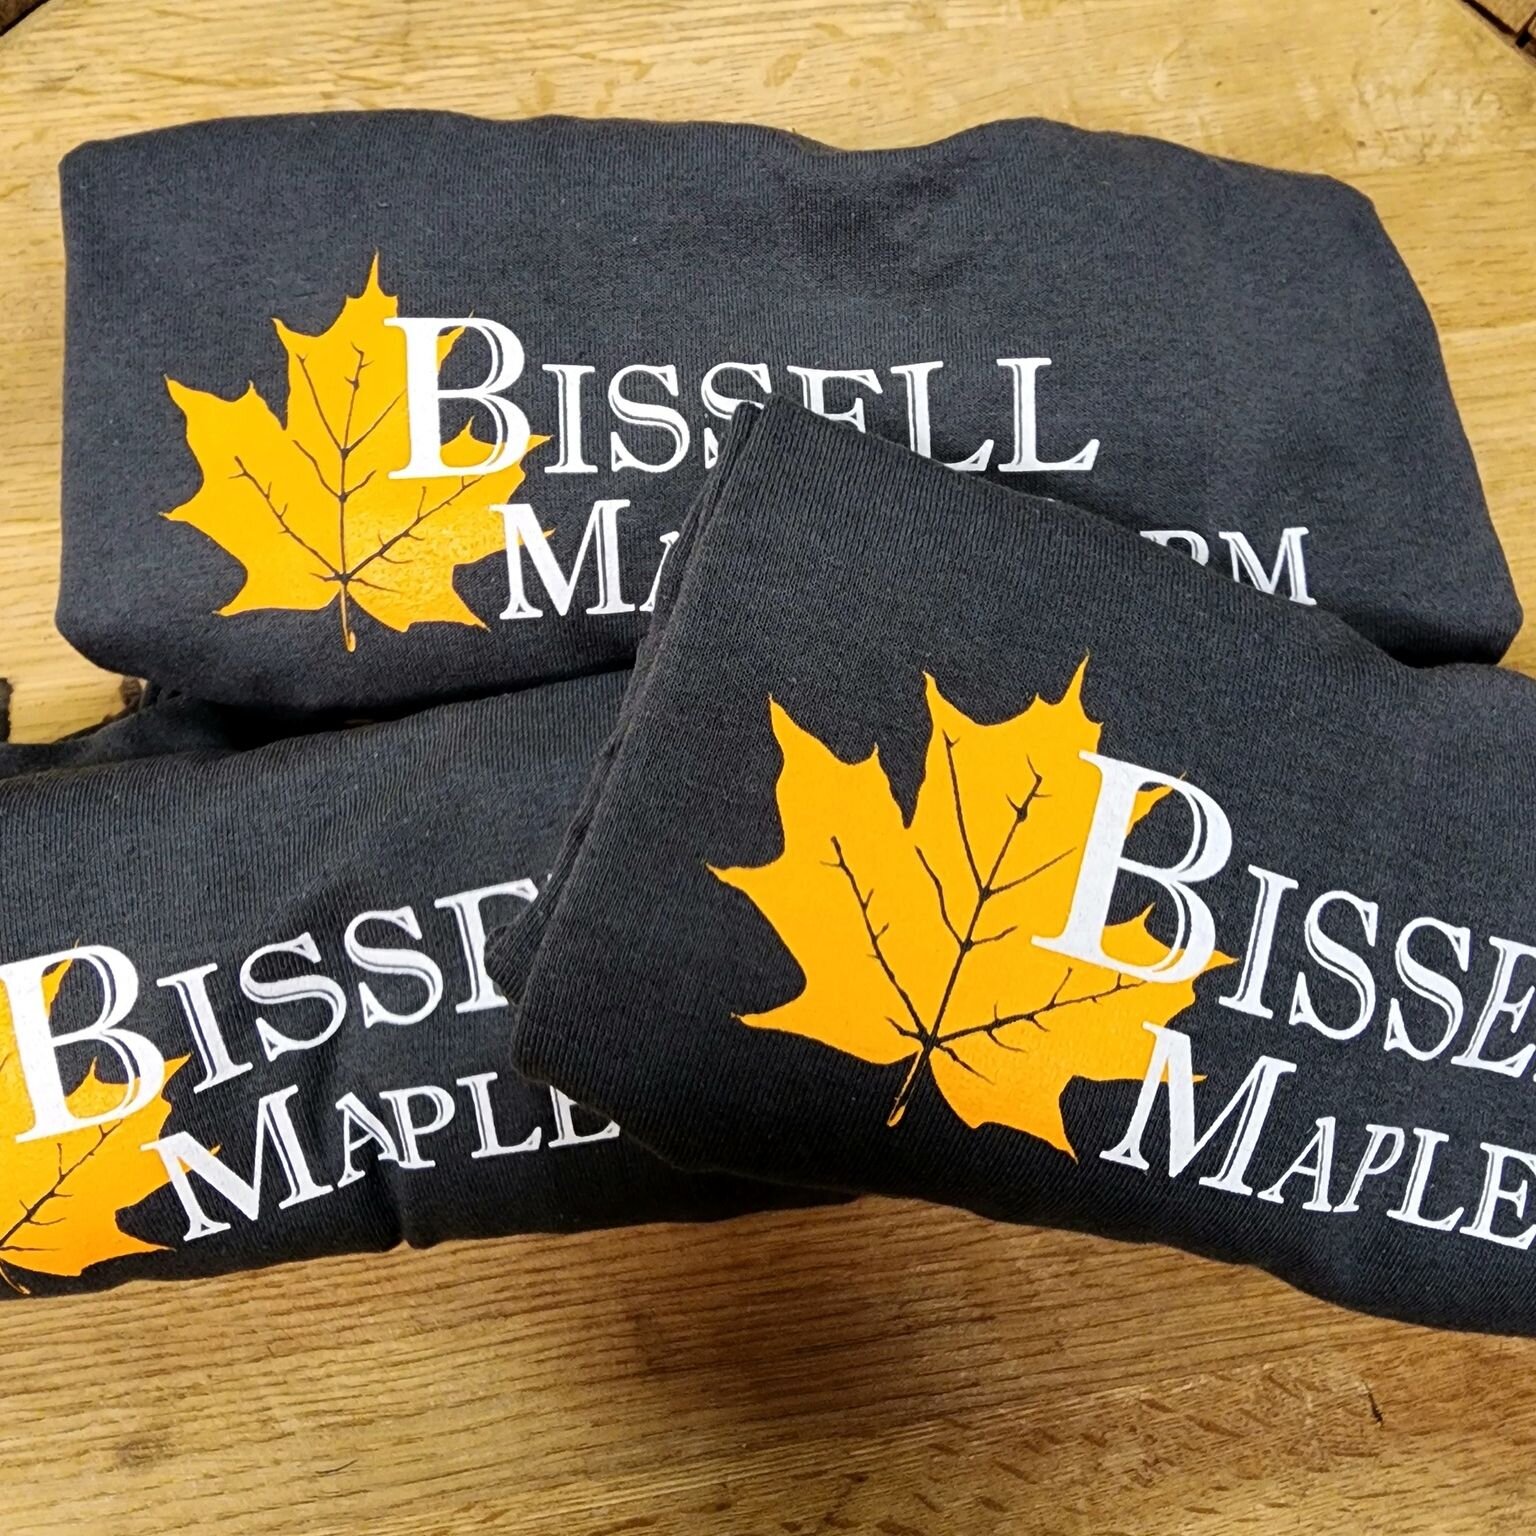 You asked, and we delivered.

Bissell Maple Farm SWAG is COMING SOON!! 🥳🎉🎊

We'll keep you updated when it is officially launched, so keep an eye out 👀